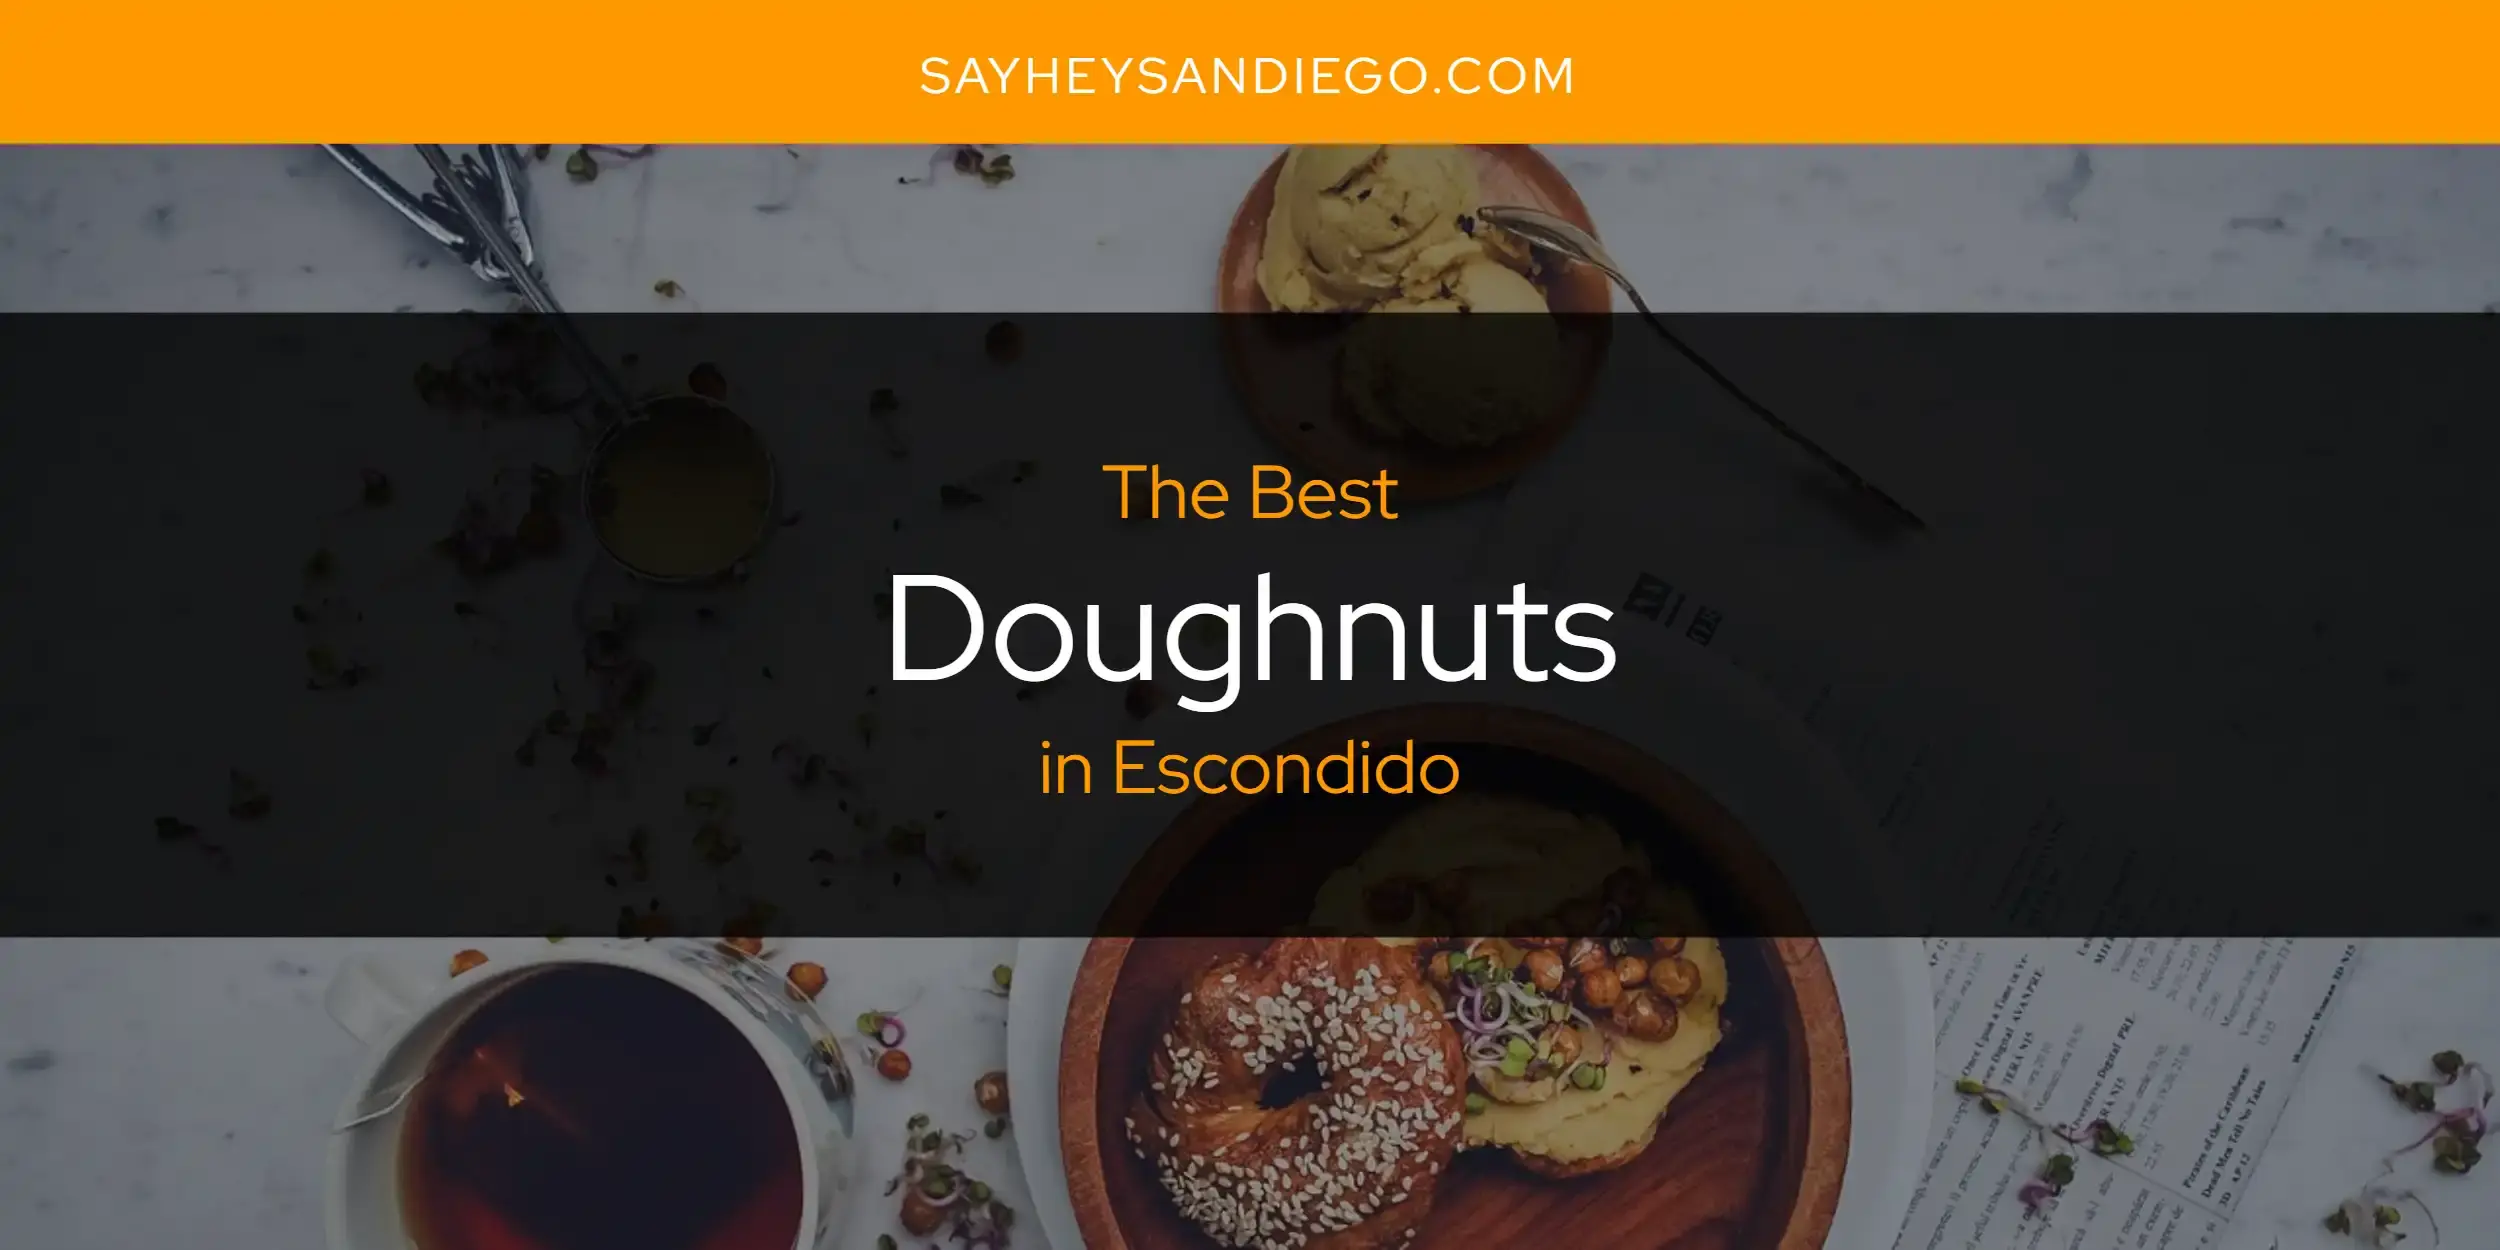 Best Doughnuts in Escondido? Here's the Top 13